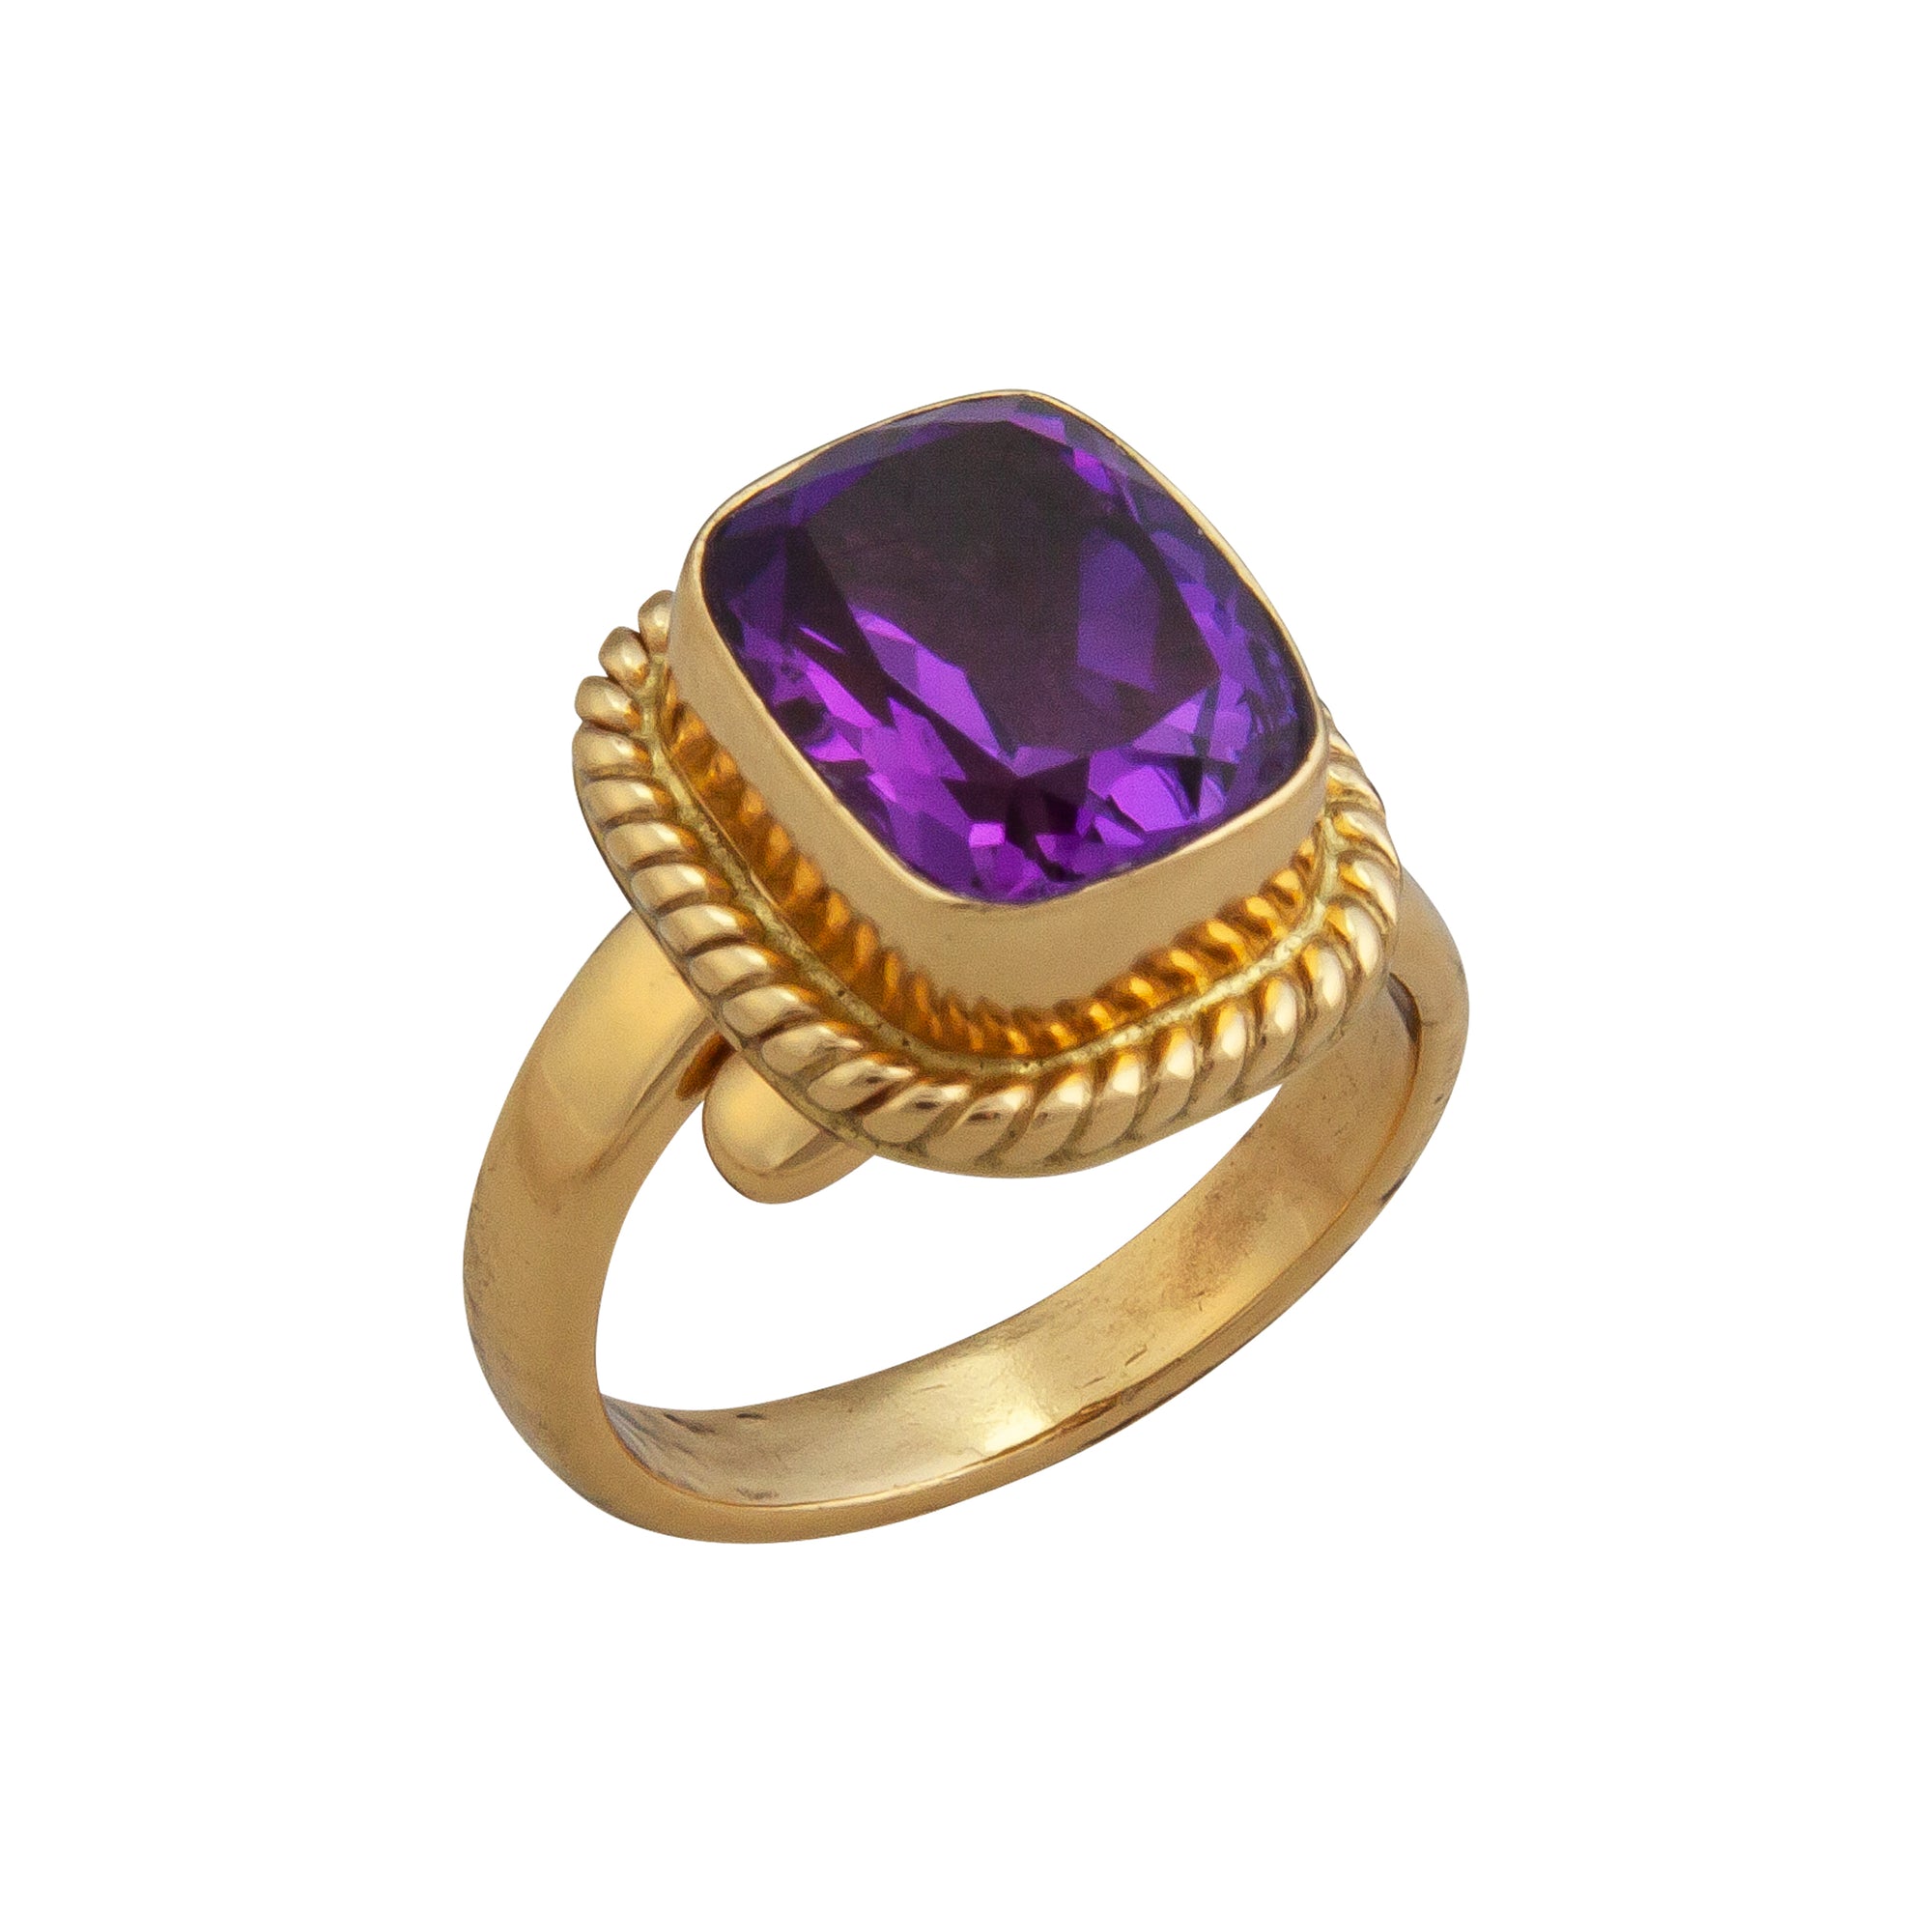 Charles Albert Jewelry - Alchemia Amethyst Adjustable Rope Ring - Side View